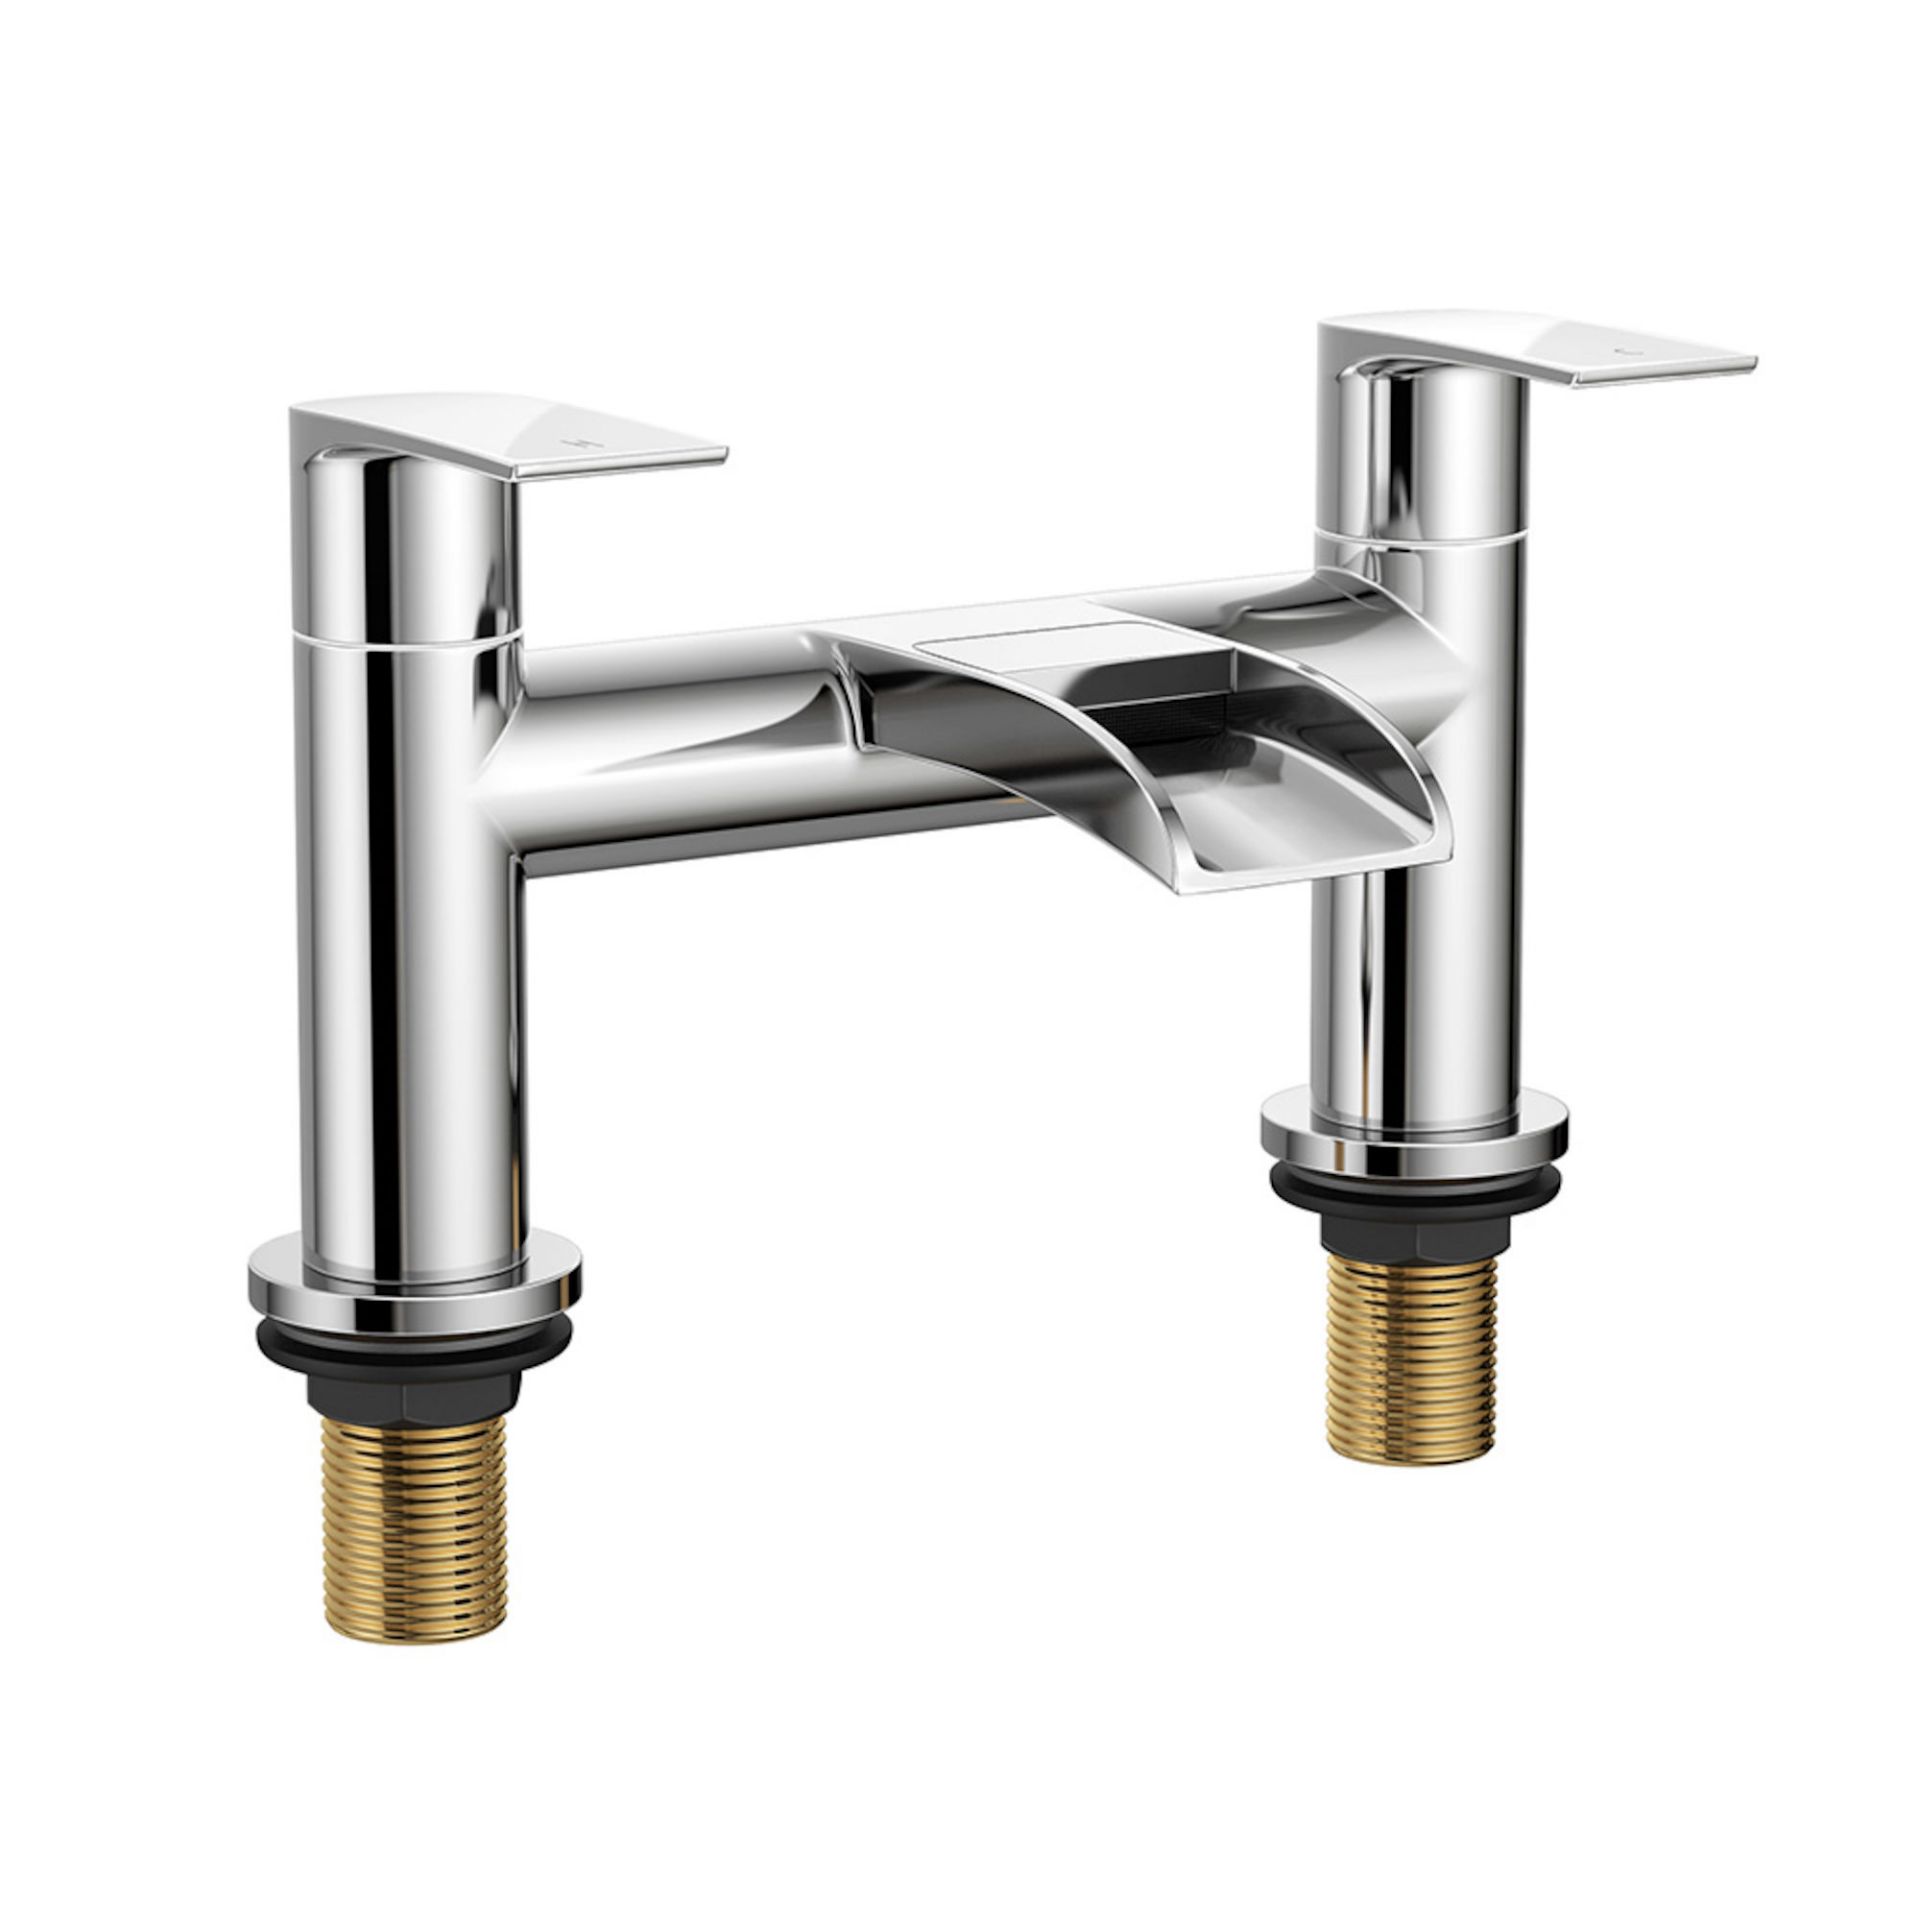 (CC174) Denver Waterfall Bath Filler Mixer Tap Chrome Plated Solid Brass 1/4 turn solid brass... - Image 2 of 2